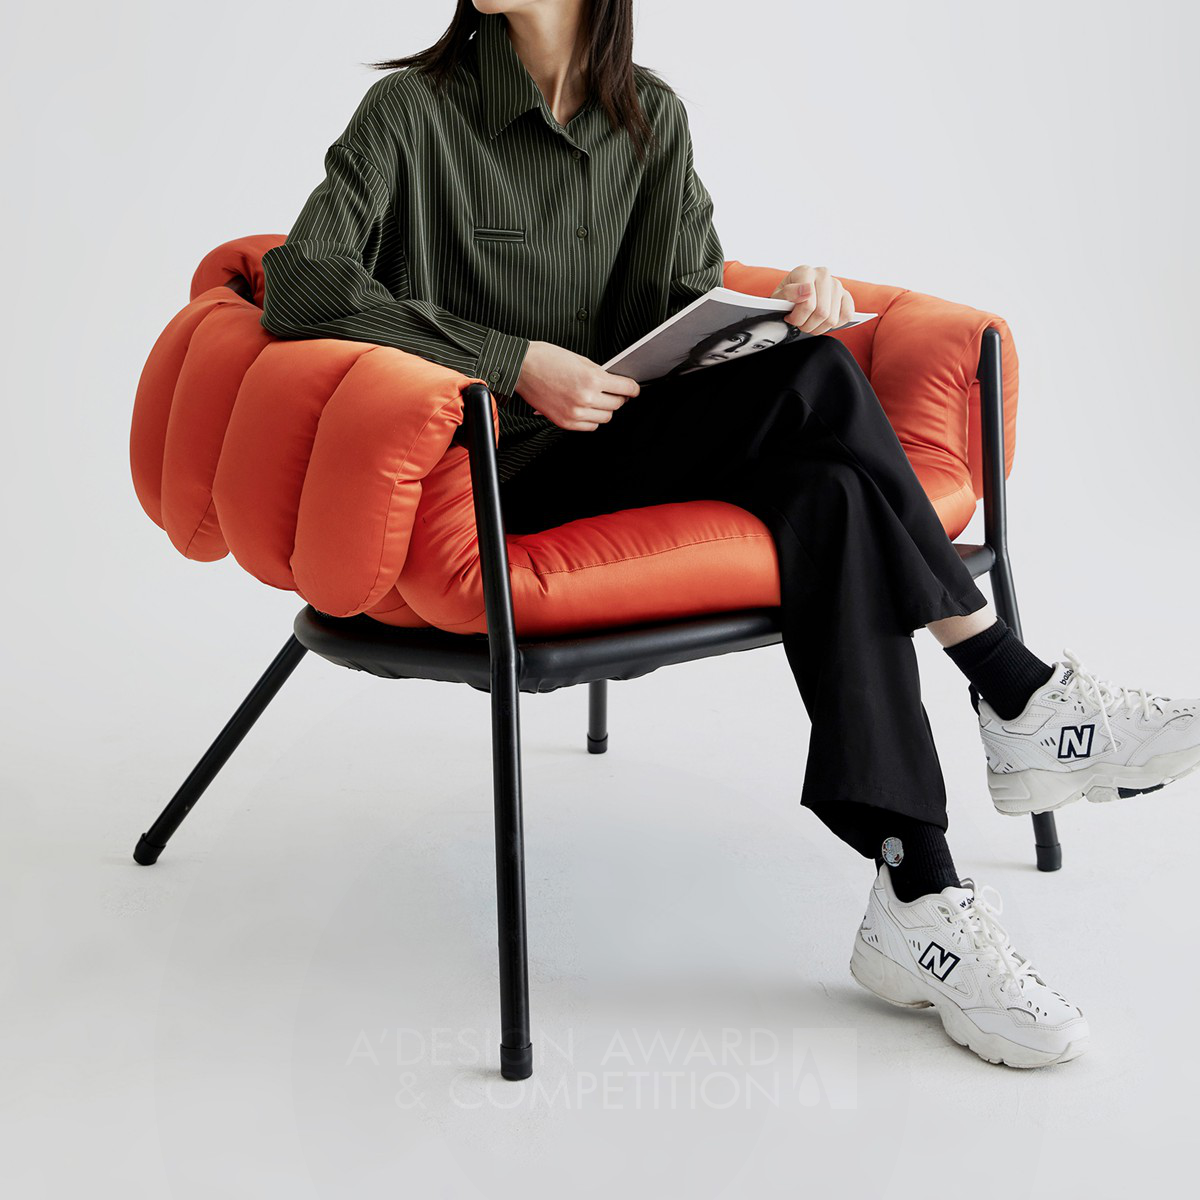 Wearing Chair: A Changeable Chair for Every Season